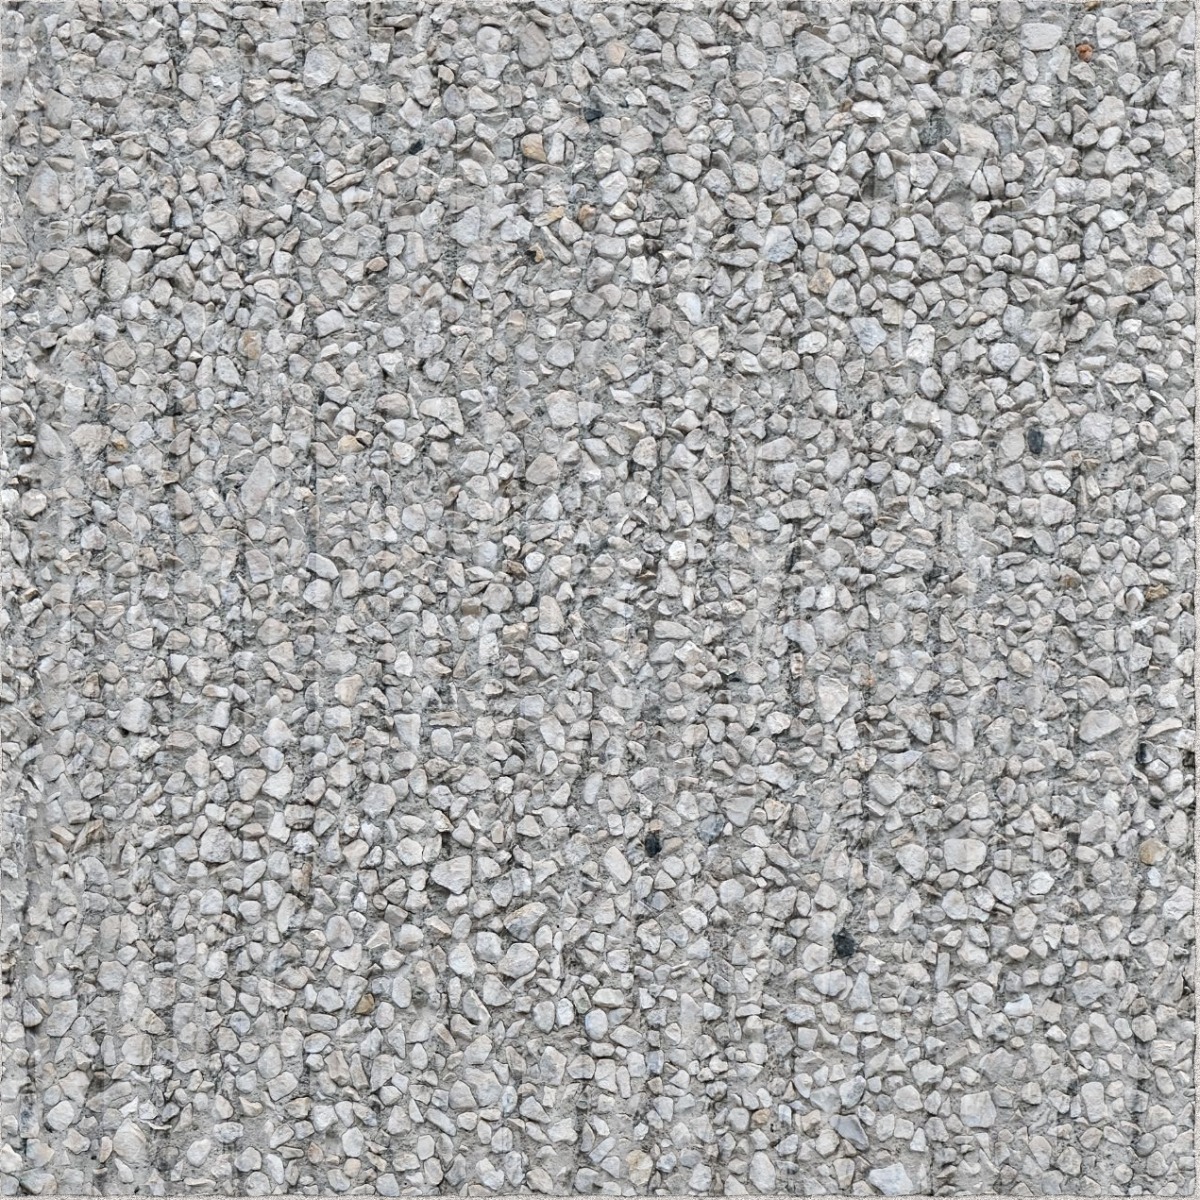 A seamless concrete texture with exposed aggregate blocks arranged in a Stack pattern